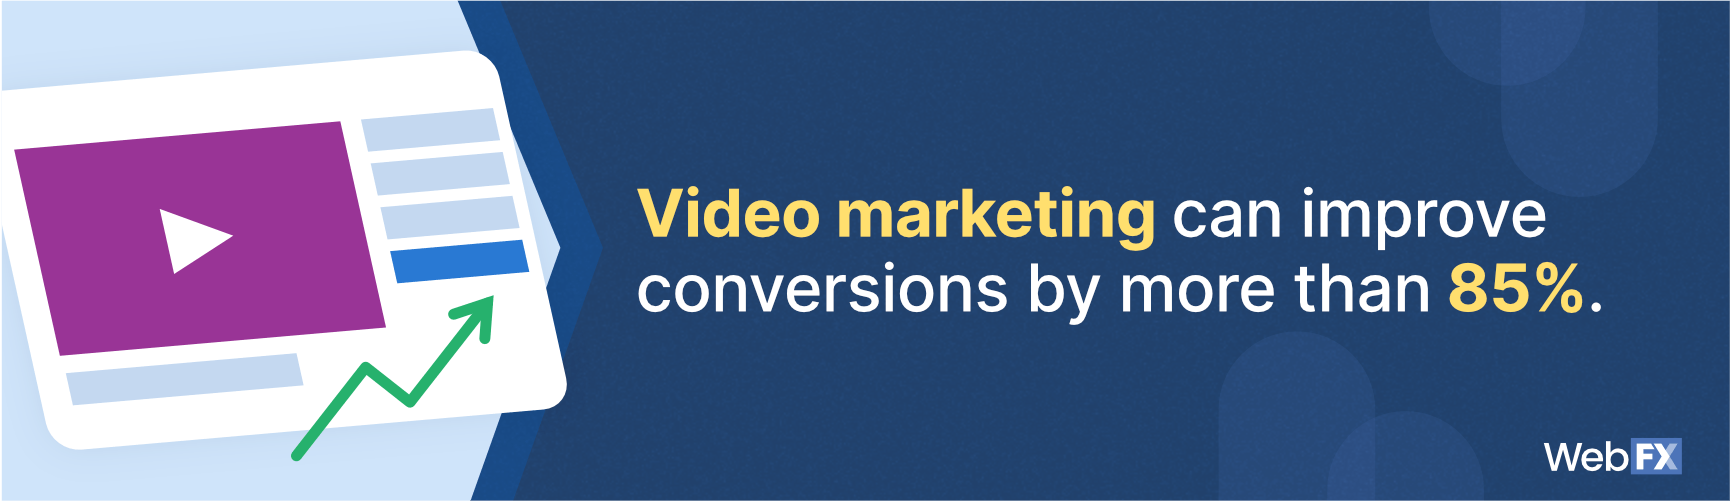 video marketing can improve conversions